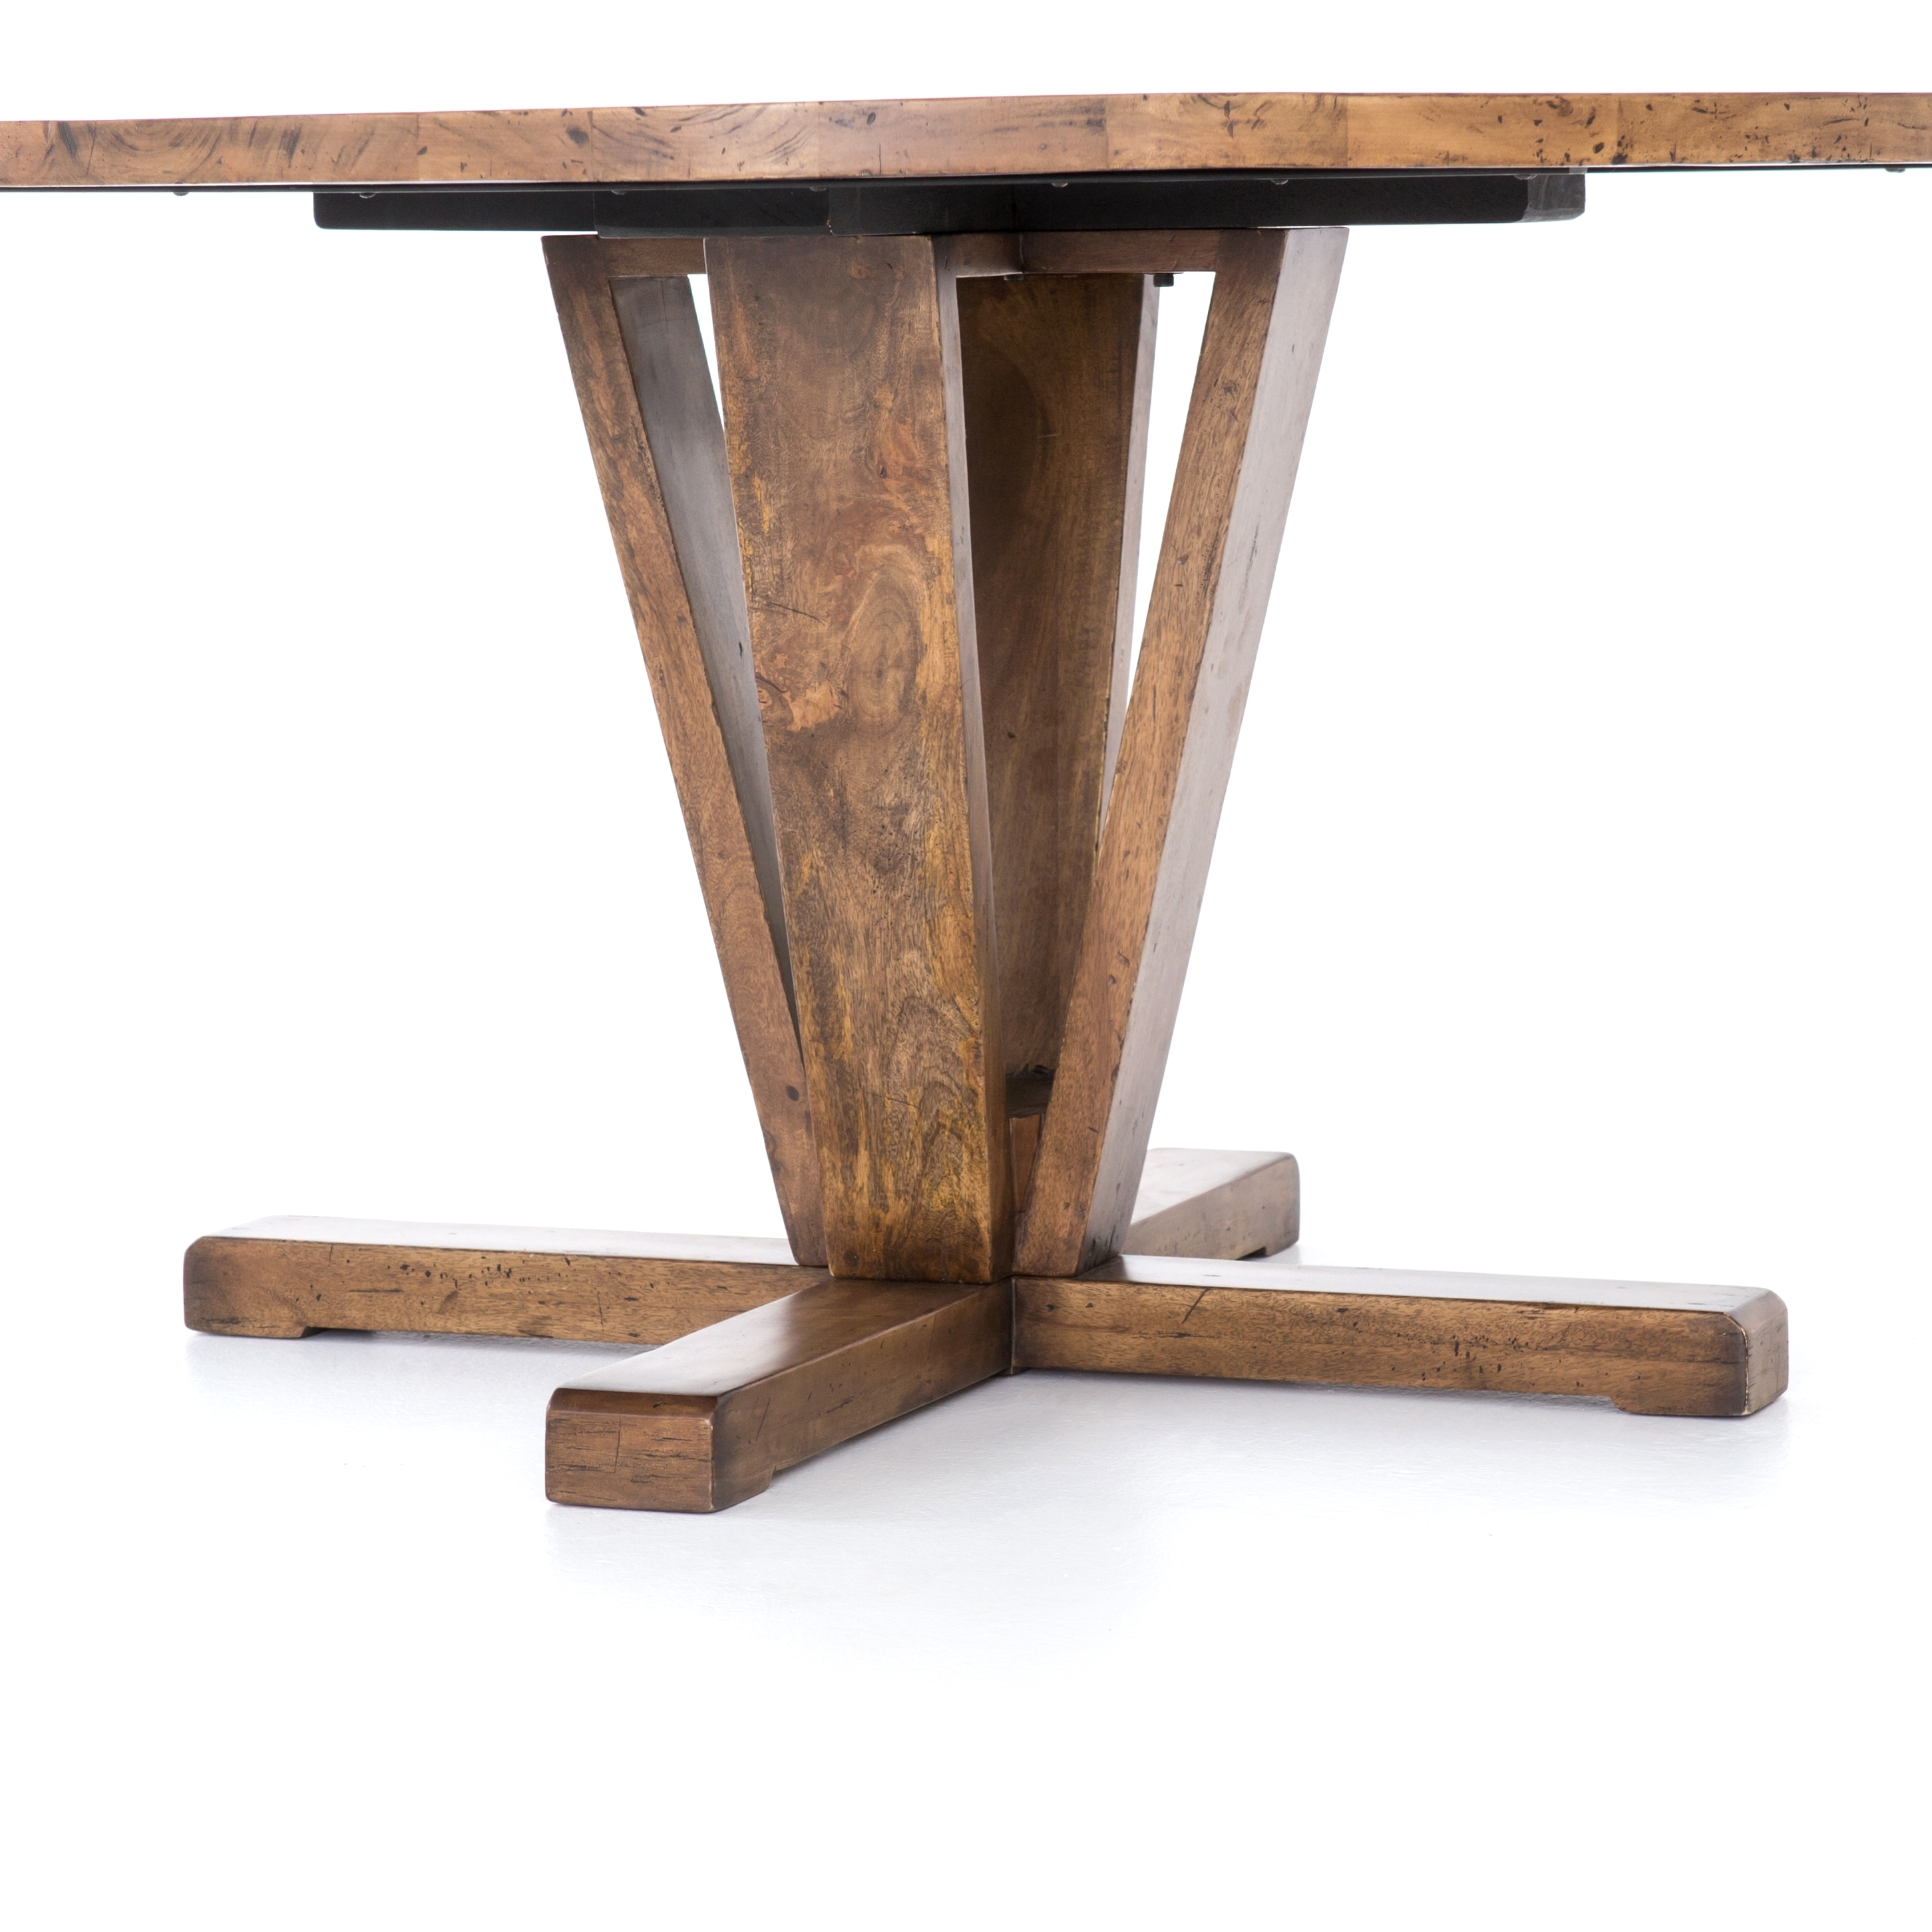 Maleva Round Dining Table, Reclaimed Wood - Image 4